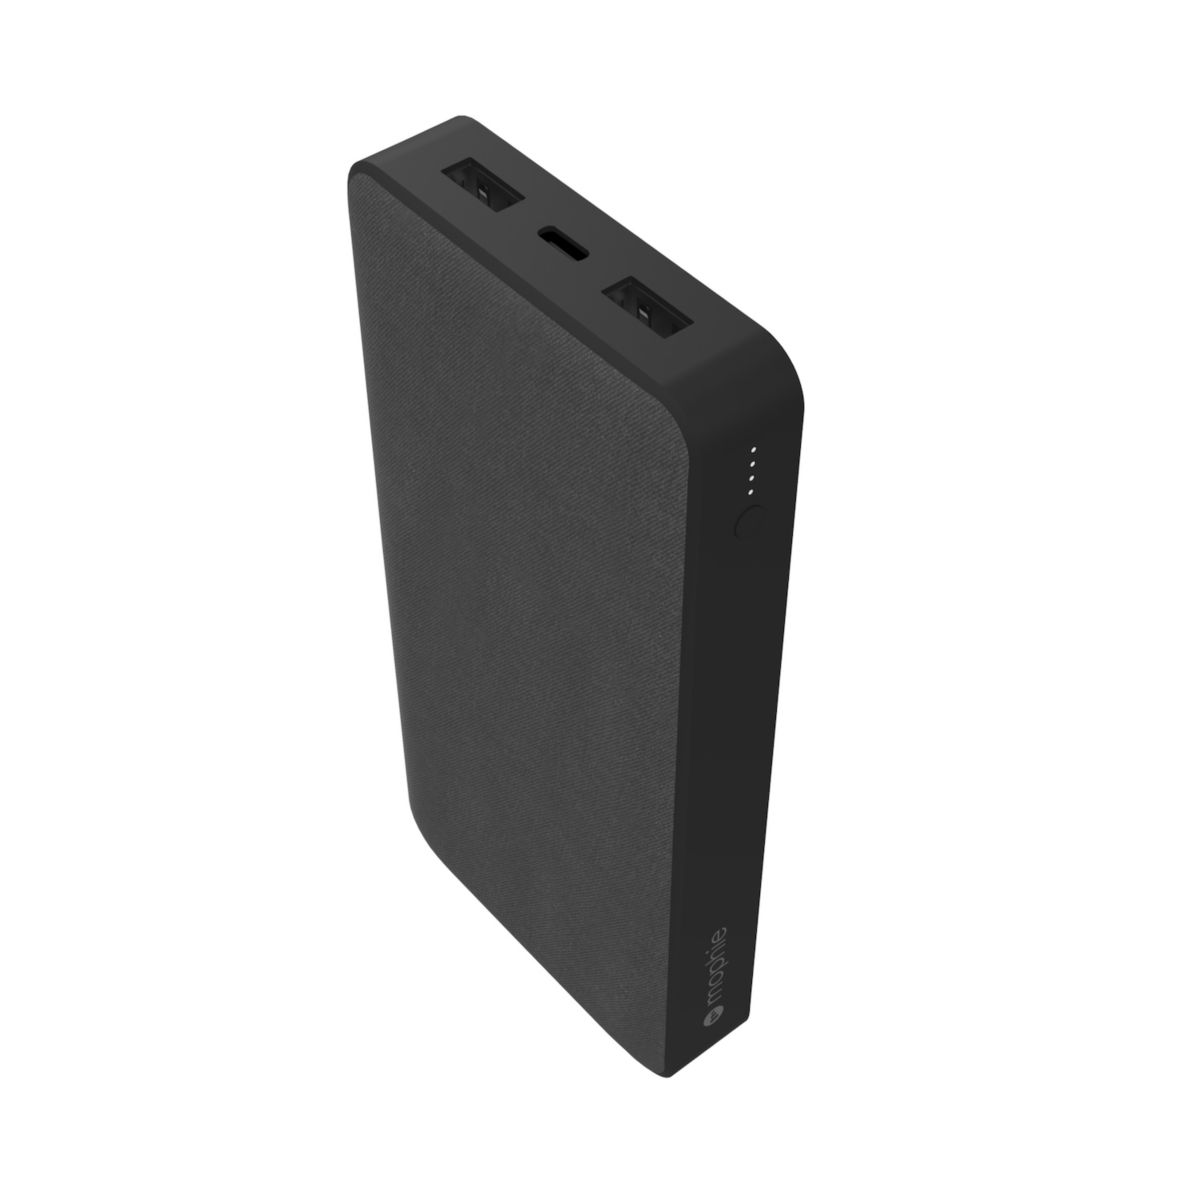 Mophie Powerstation 2020 Power Bank 20000 мАч Mophie